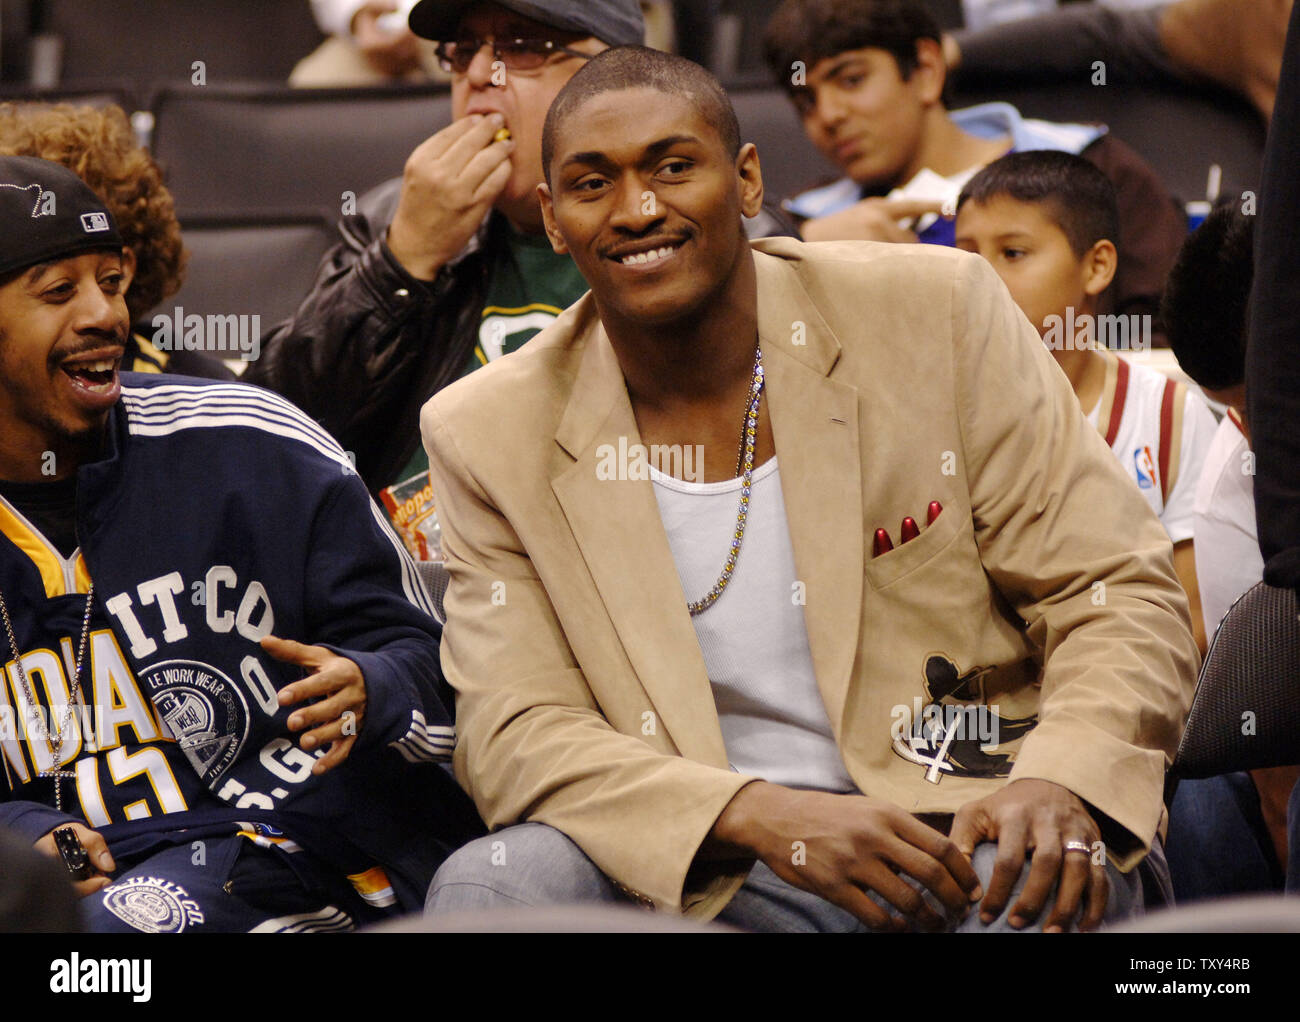 Indiana Pacers' Ron Artest (R) watches the Los Angeles Lakers' NBA basketball game against the Cleveland Cavaliers in Los Angeles on January 12, 2006.  Artest, the 2003-04 NBA defensive player of the year, was averaging 19.4 points when he voiced his desire to be traded last month. He later recanted that statement, but team president Larry Bird and Walsh have said they are no longer interested in having him play for Indiana. Artest hasn't played in a game since Dec. 6. (UPI Photo/Jim Ruymen) Stock Photo